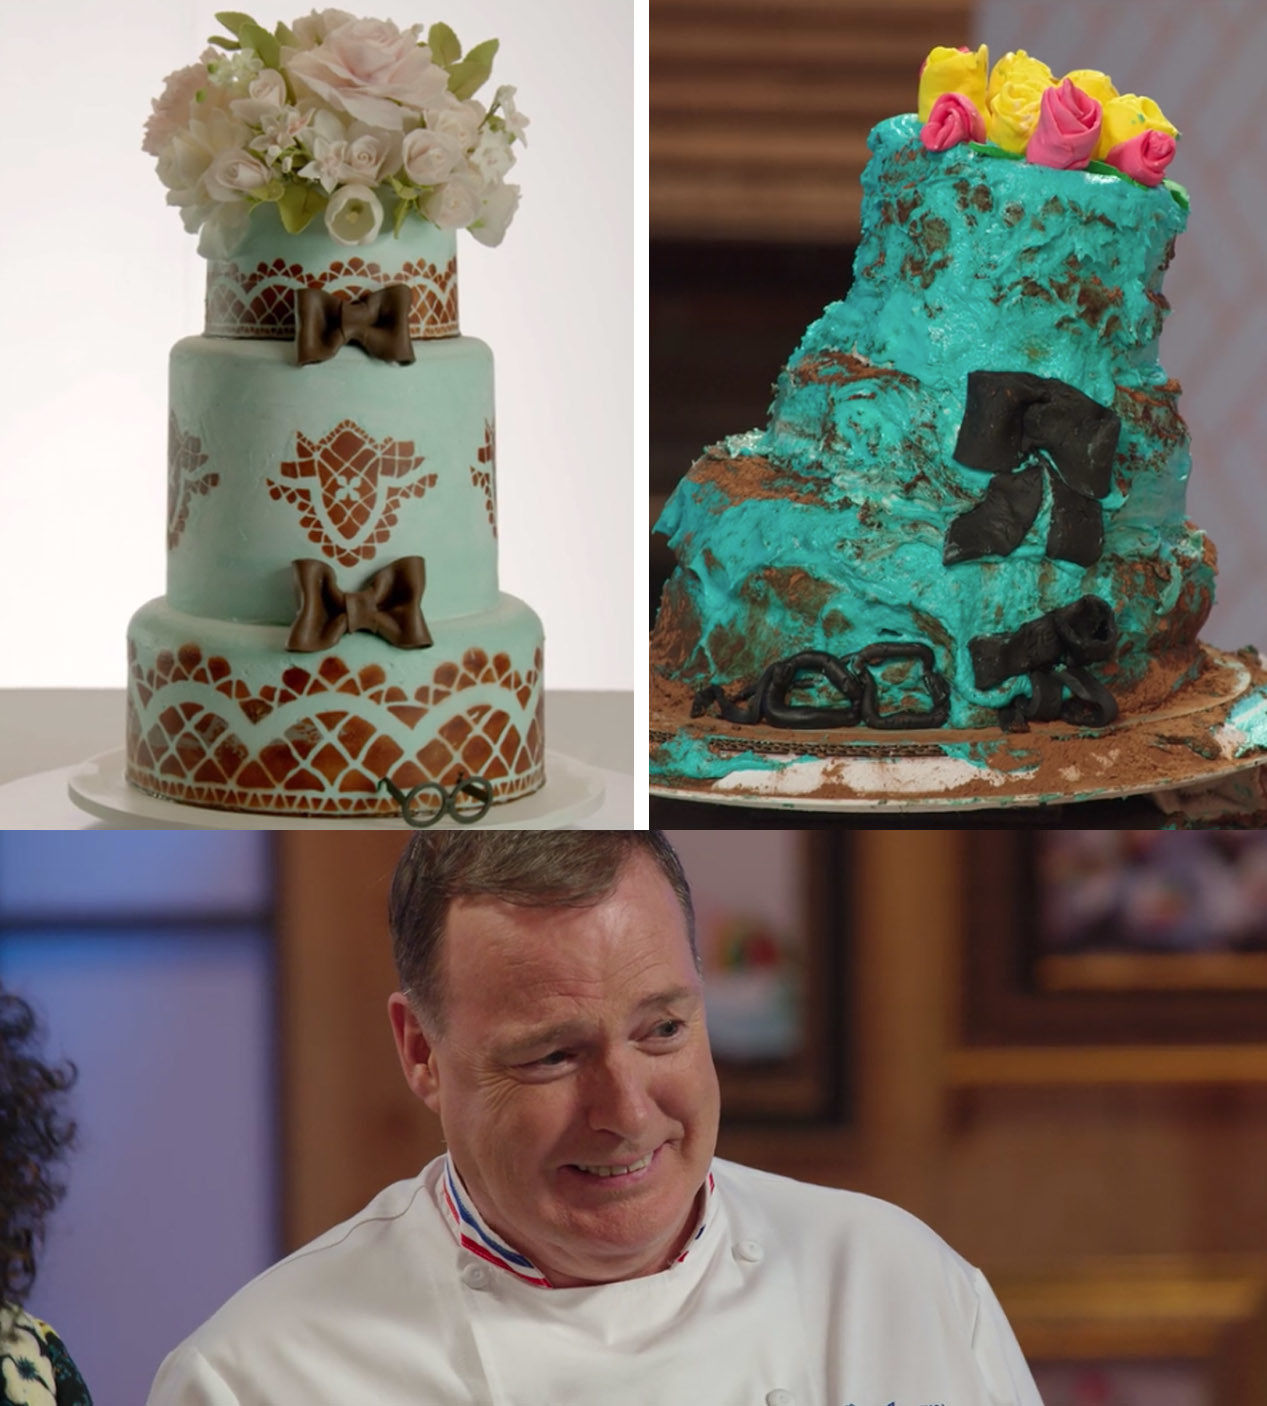 Food Shows Nominated For Emmys in 2019: Top Chef, Nailed It!, And More